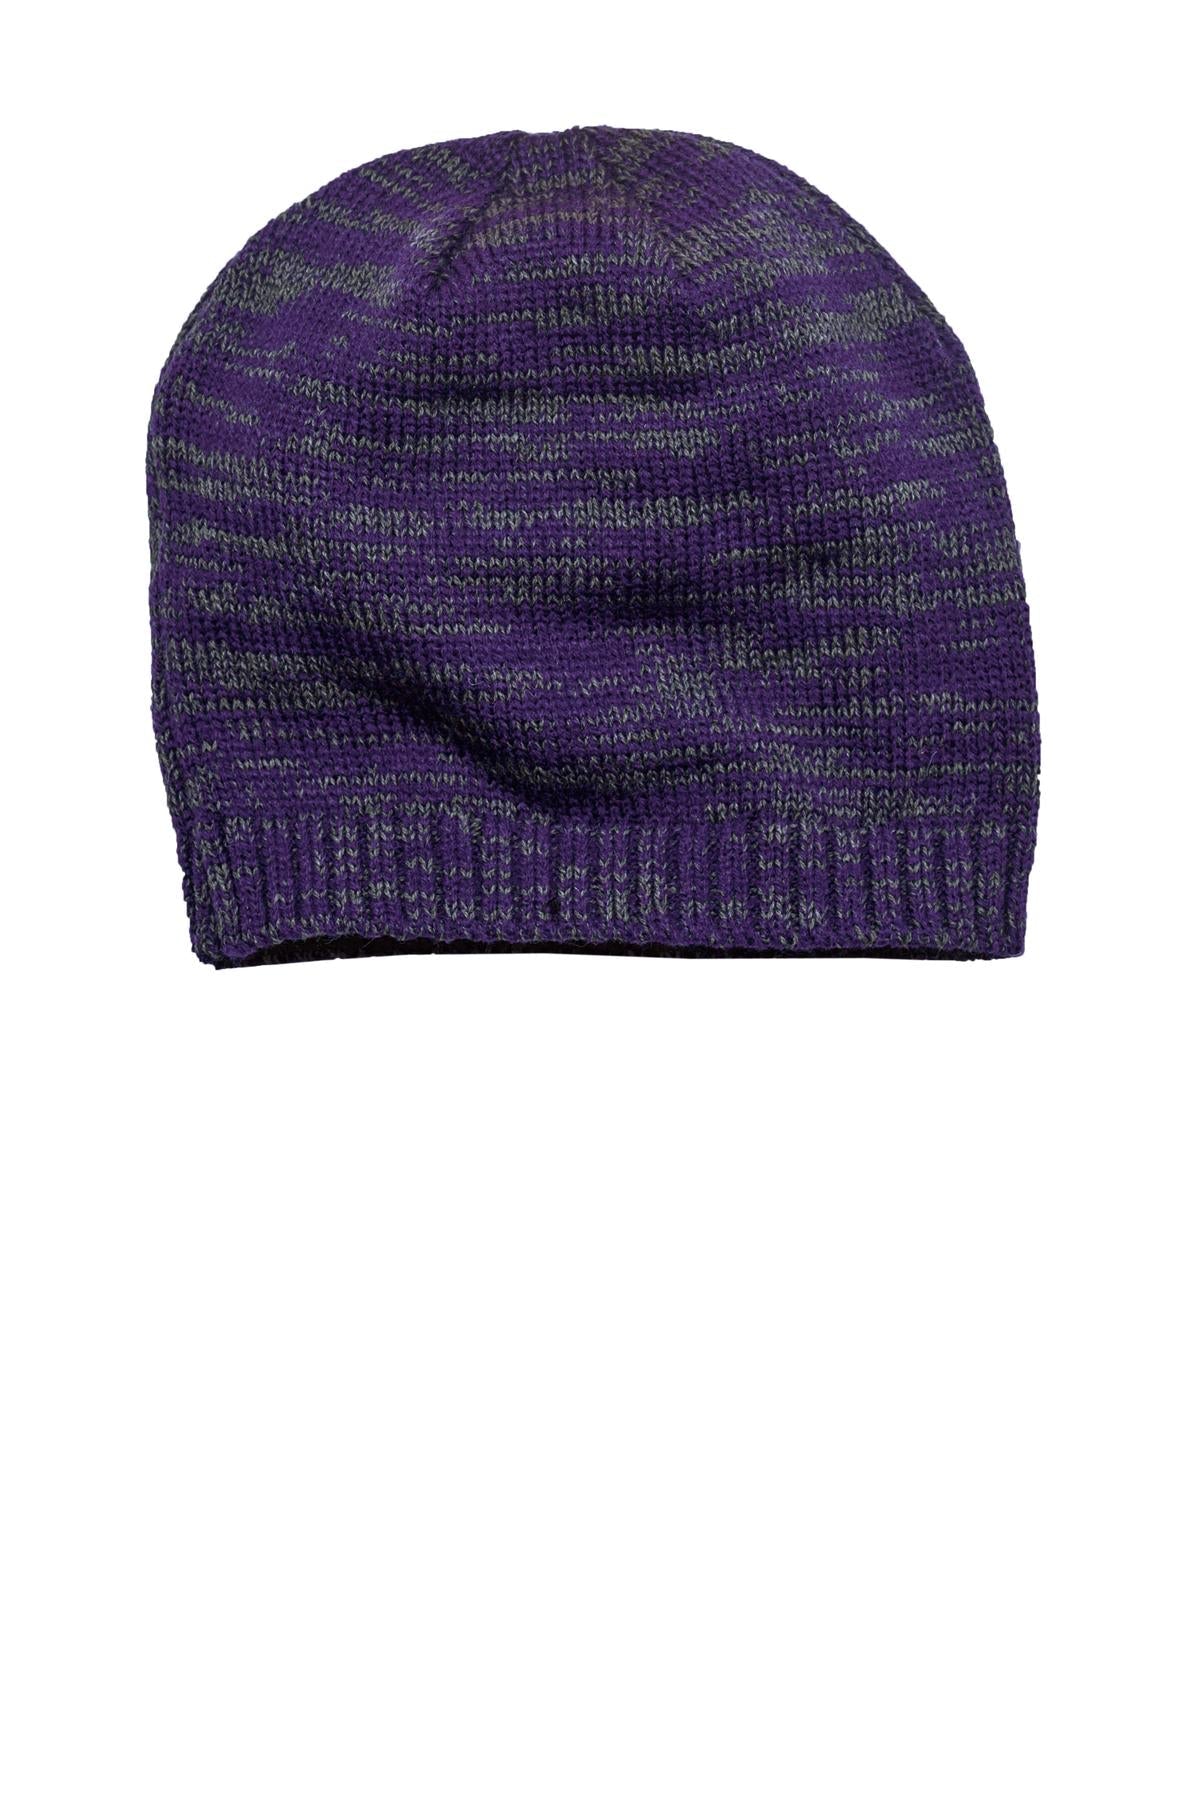 District® Spaced-Dyed Beanie DT620 - DFW Impression